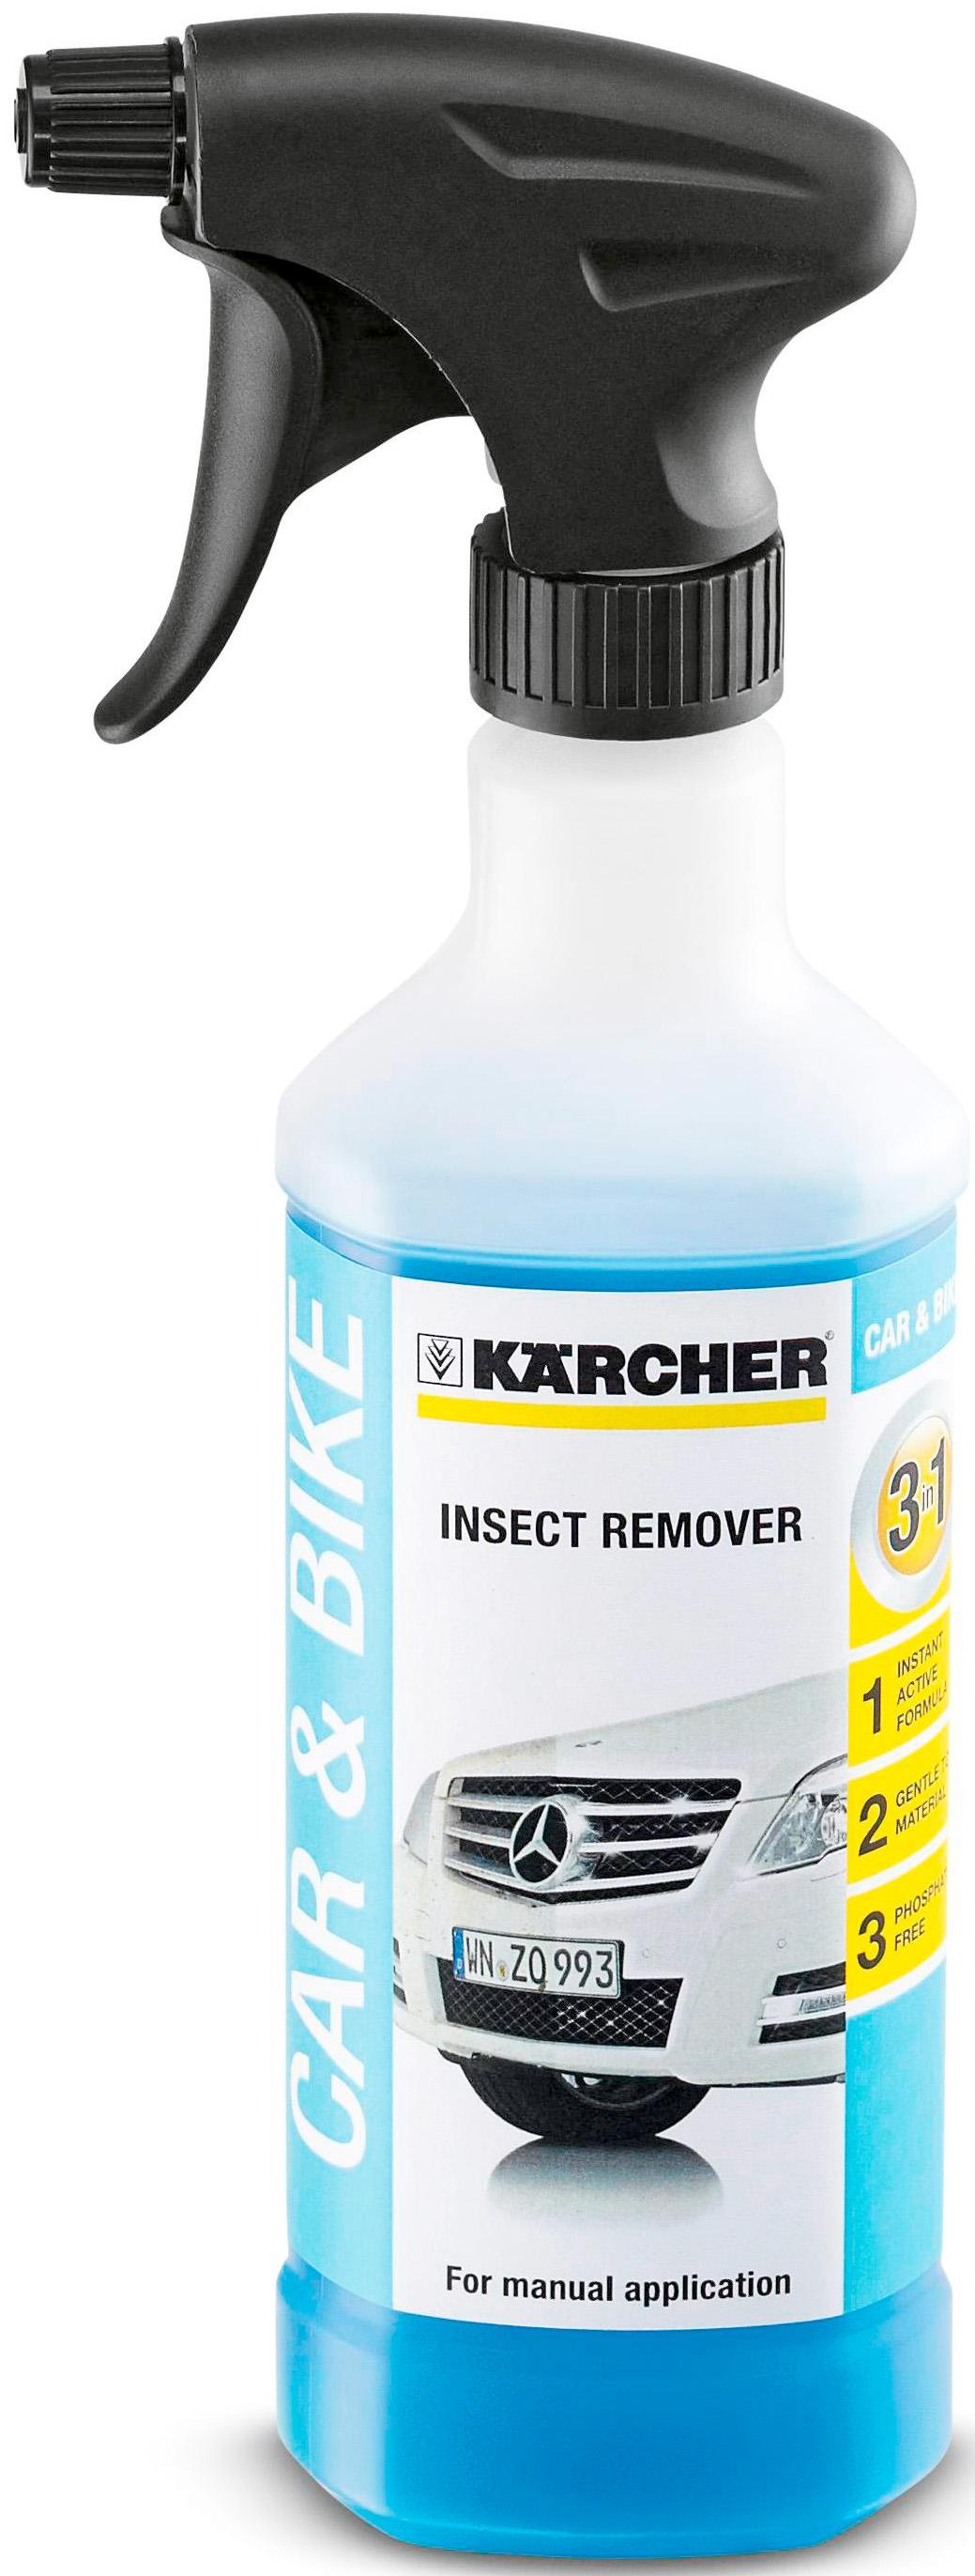 Karcher Insect Remover 500Ml